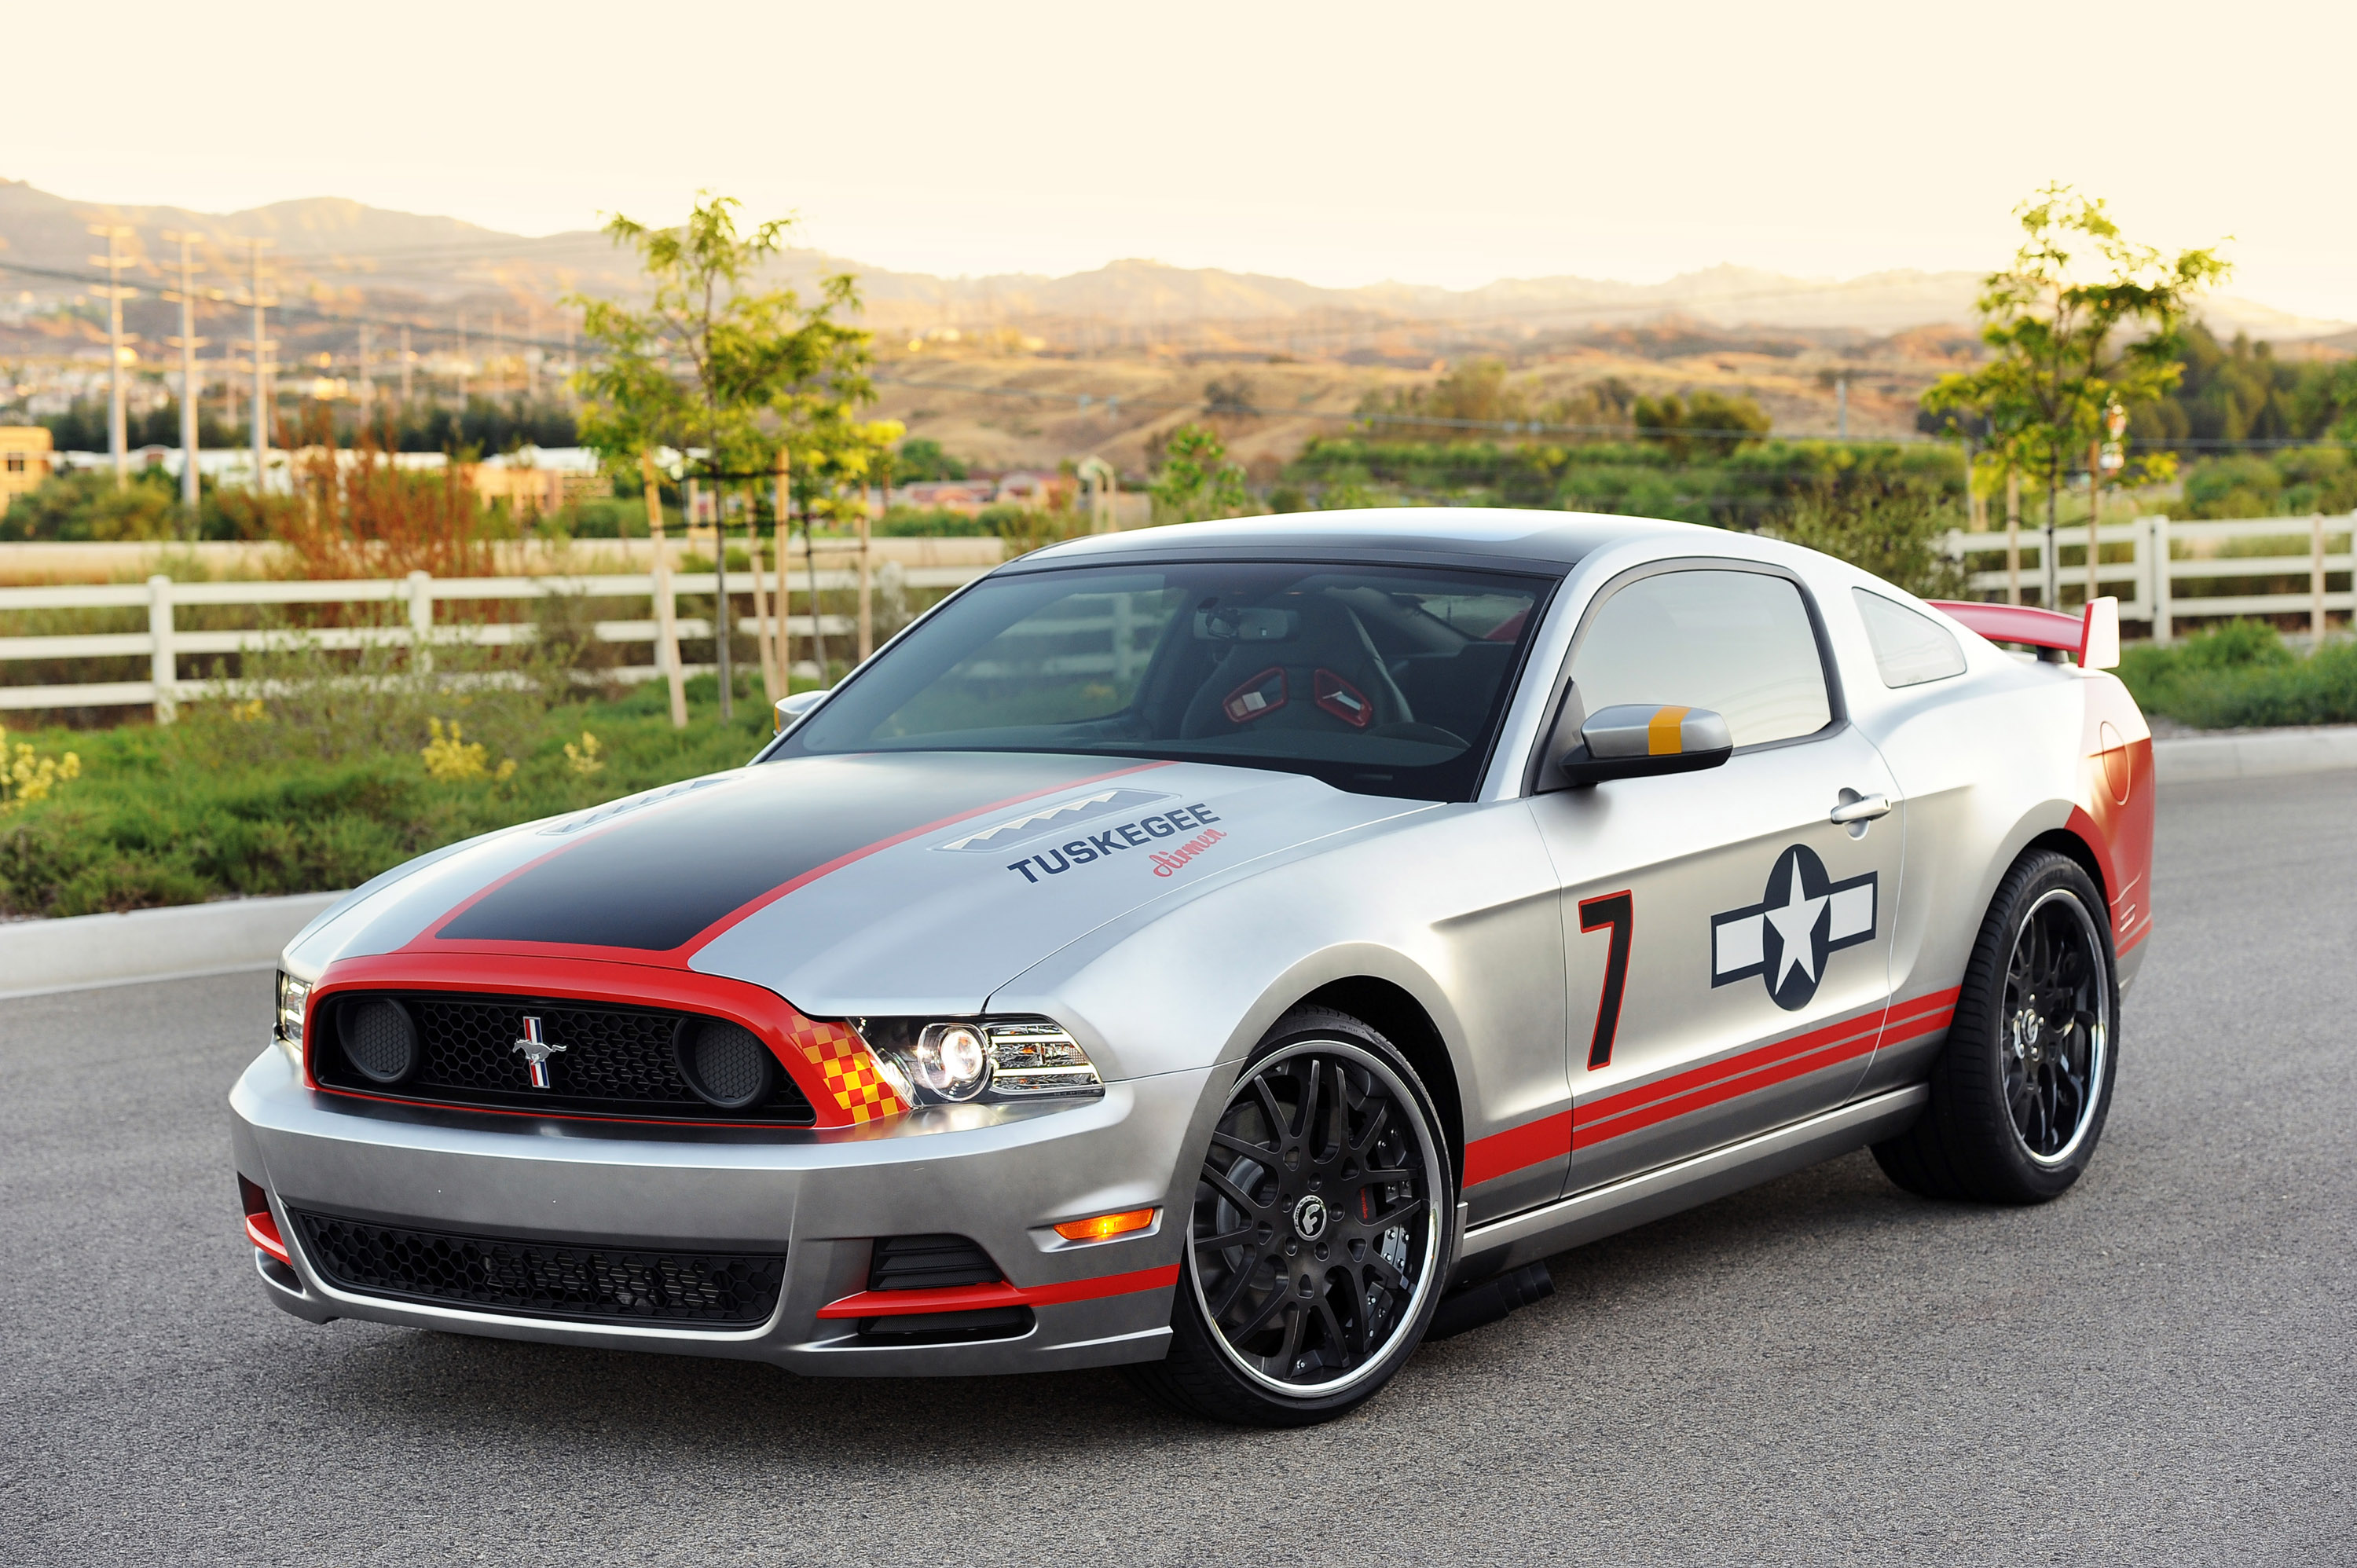 Ford Mustang Red Tails GT Edition